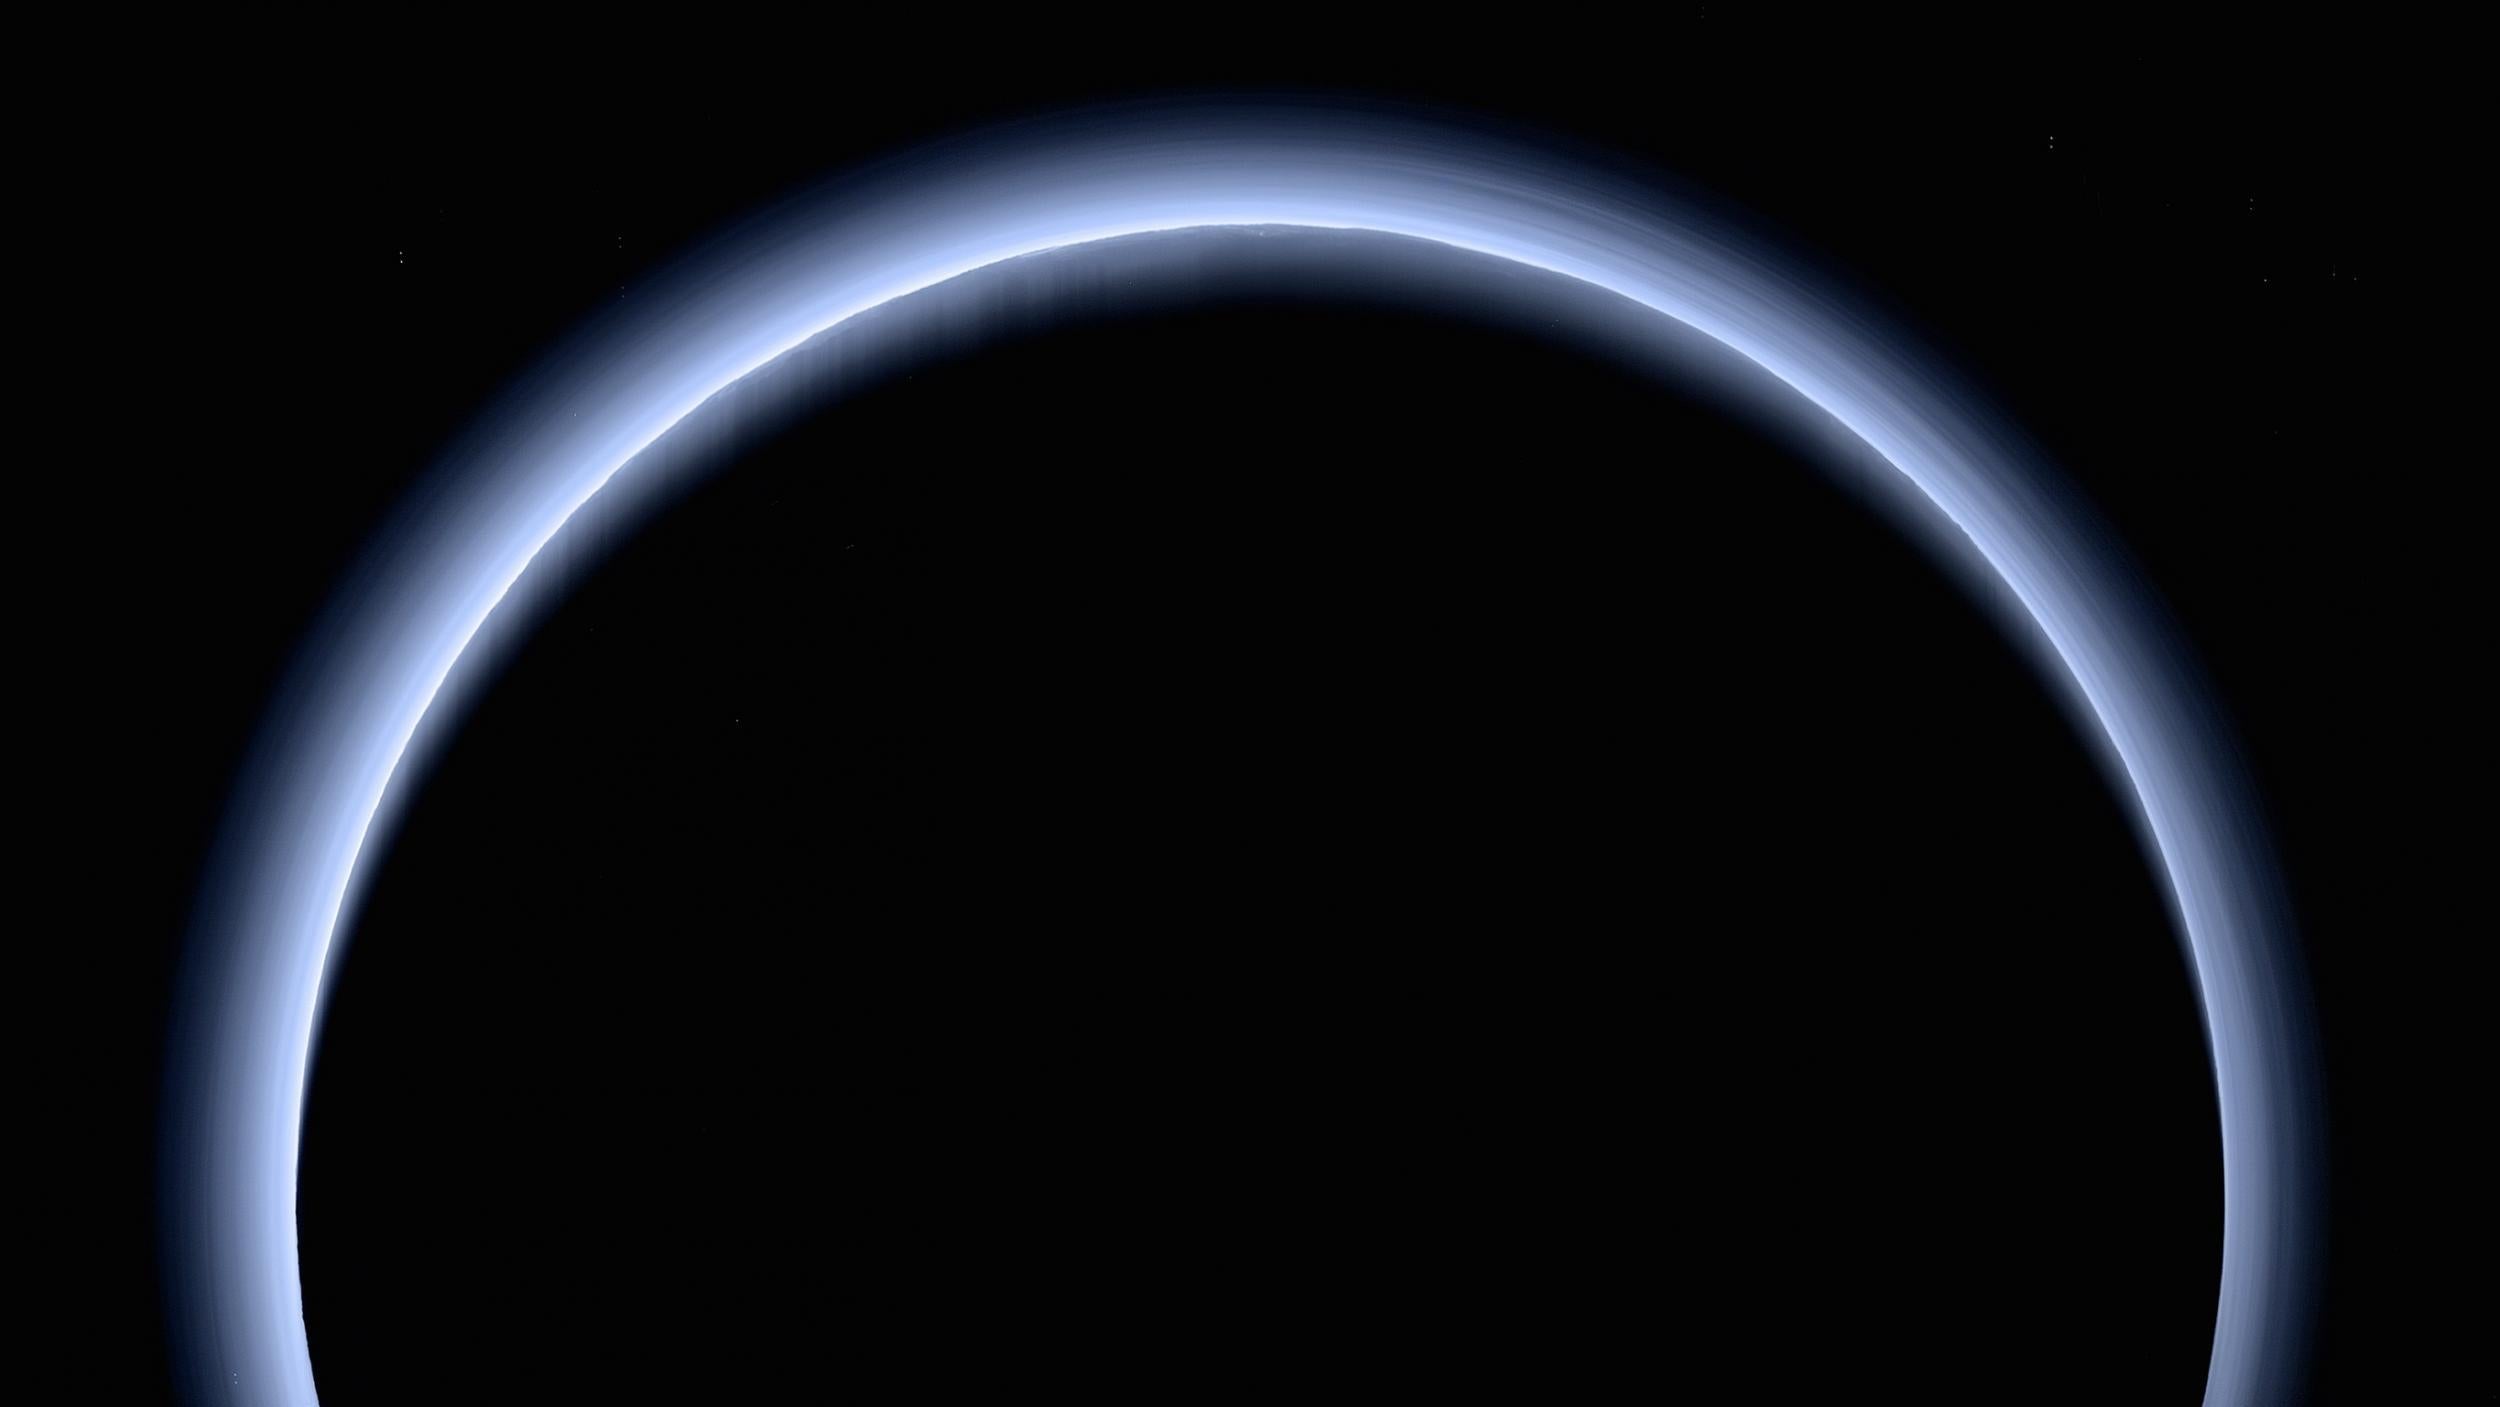 The photo was taken as the New Horizons spacecraft passed 120,000 miles from Pluto